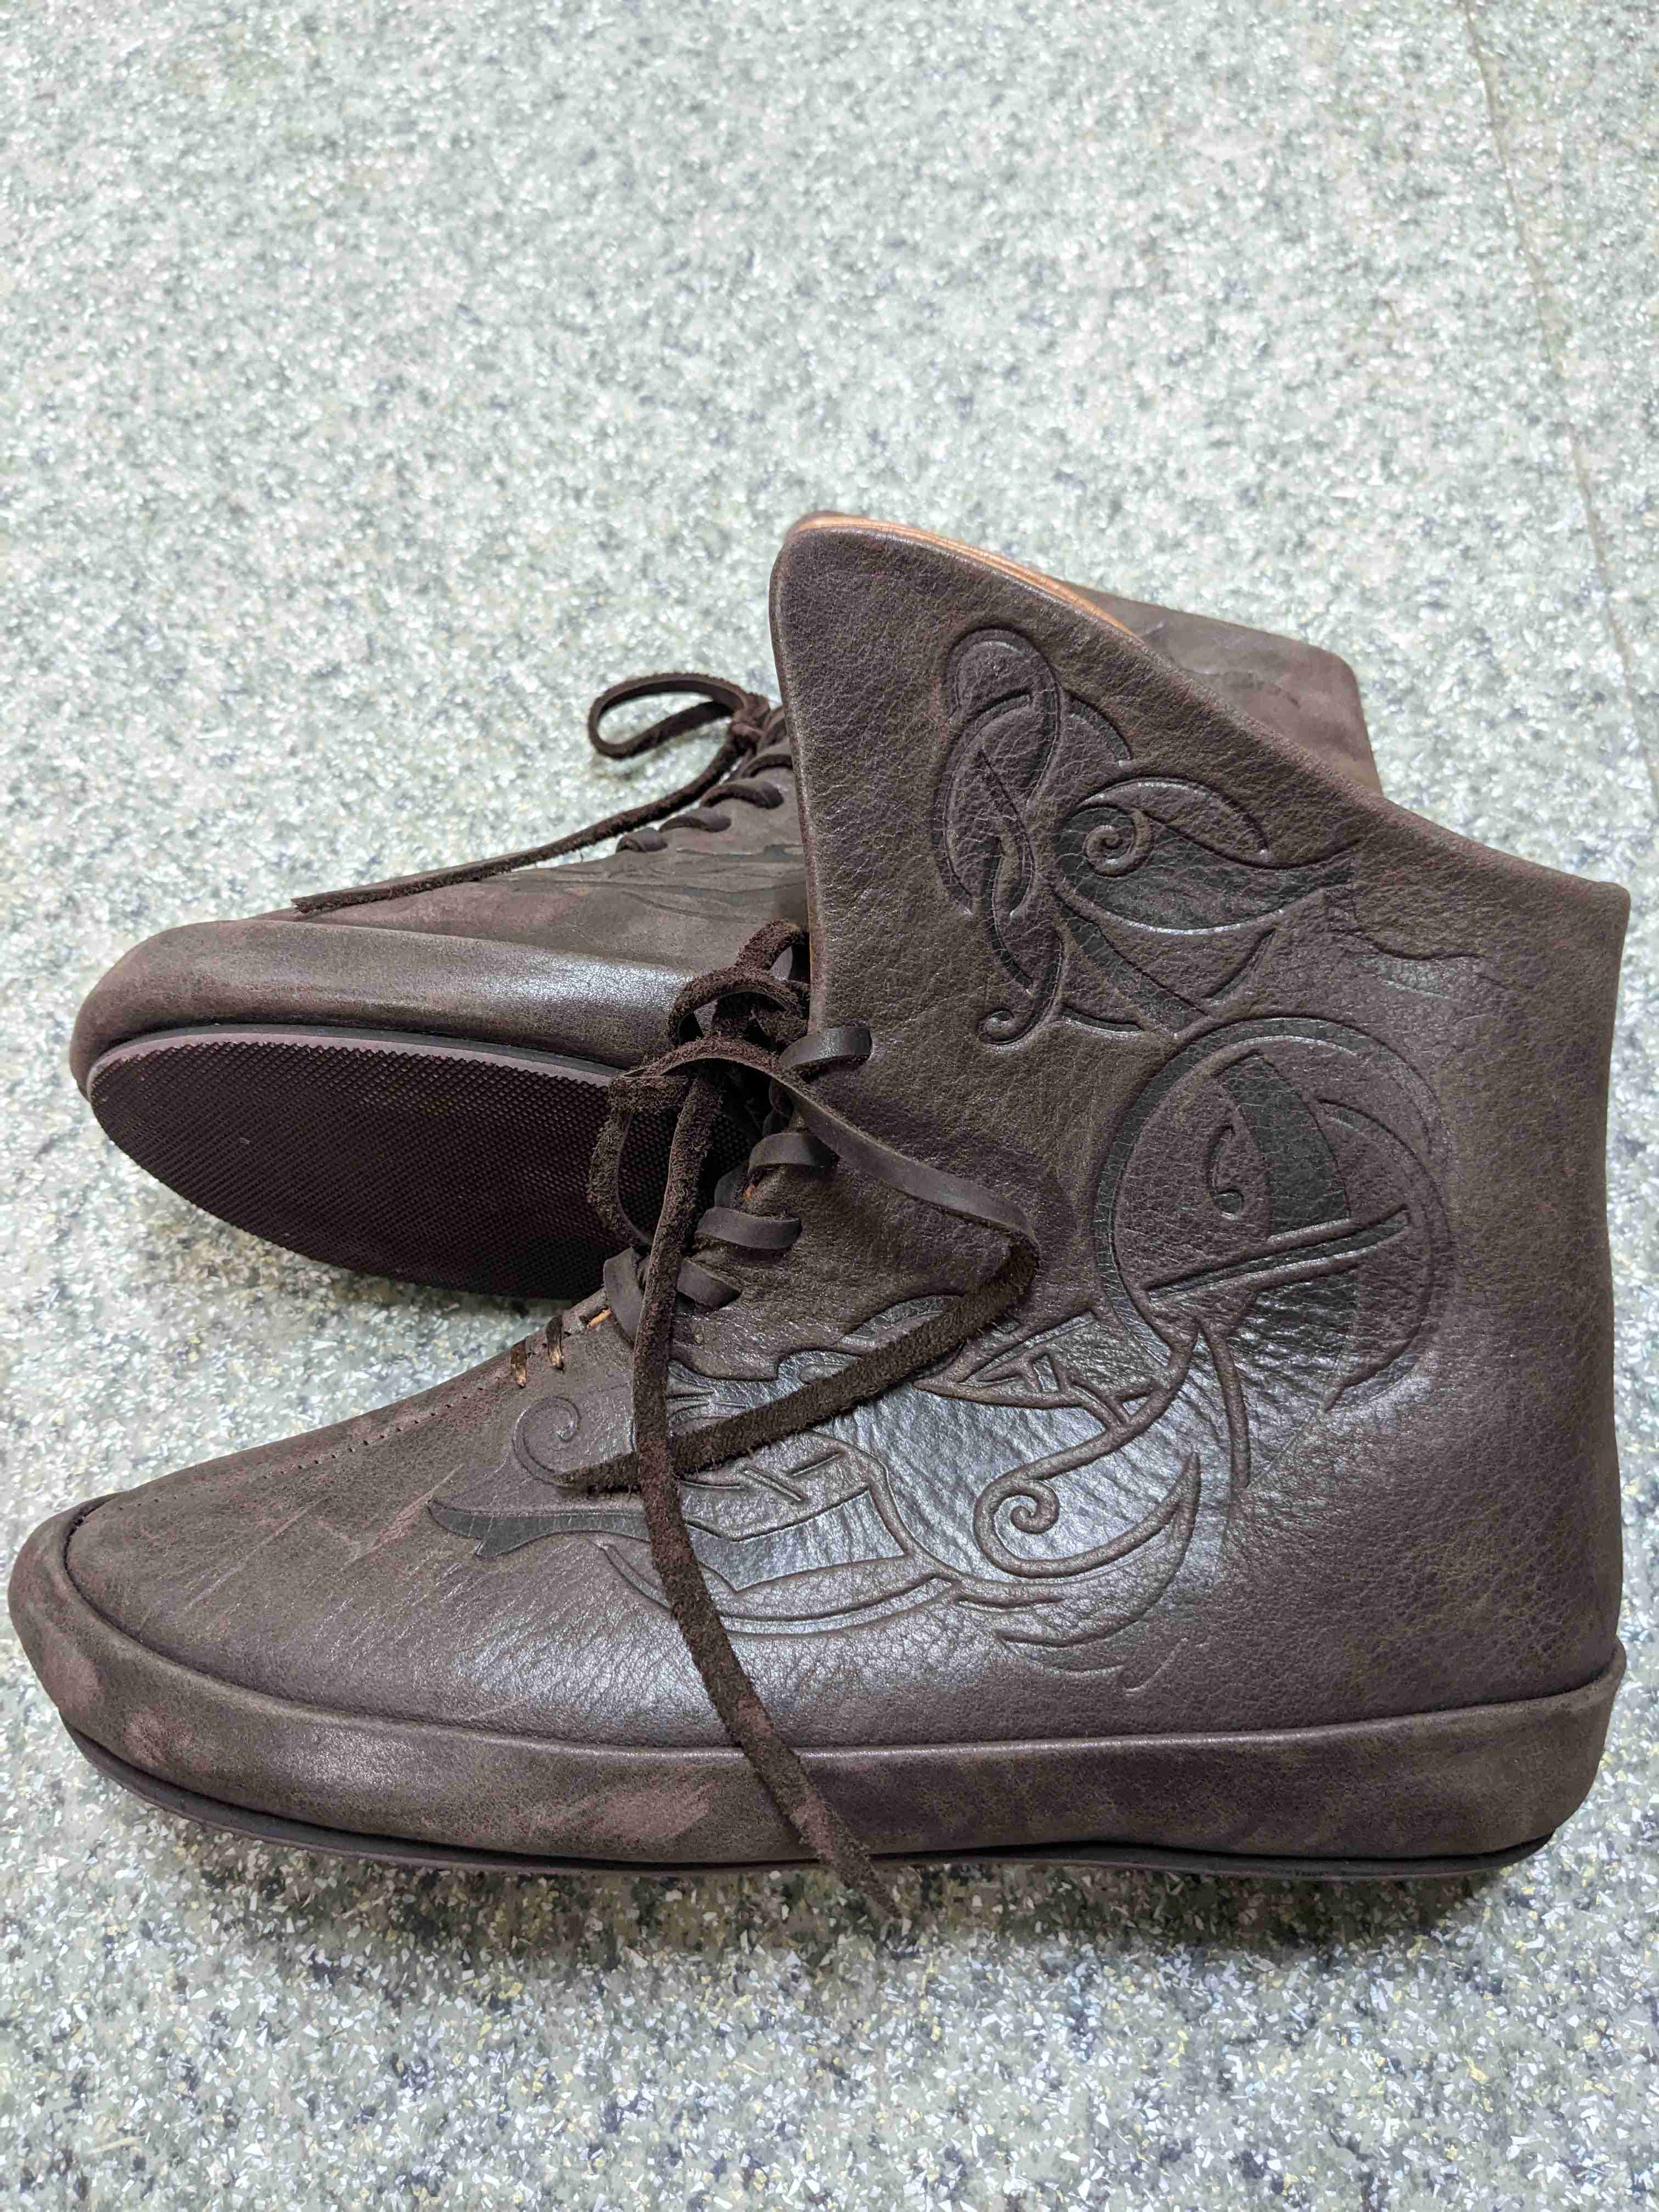 Sale “Forest Boots” For Women